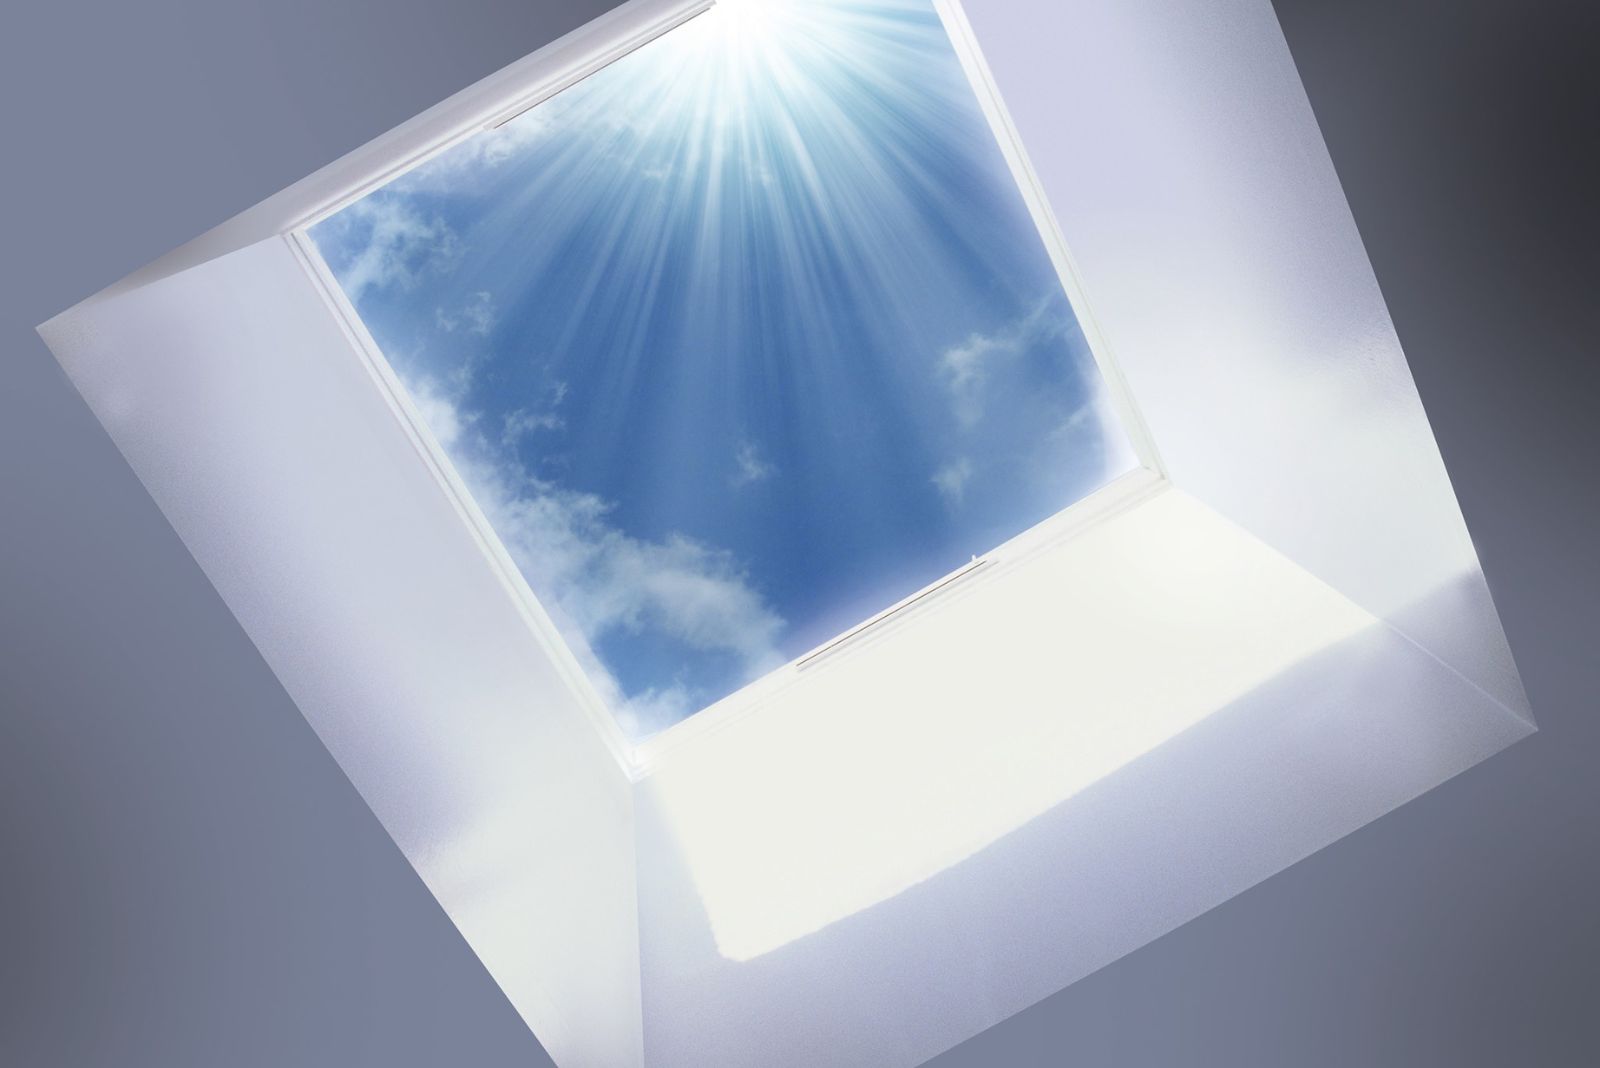 Electric Opening Skylight 800 x 1500mm